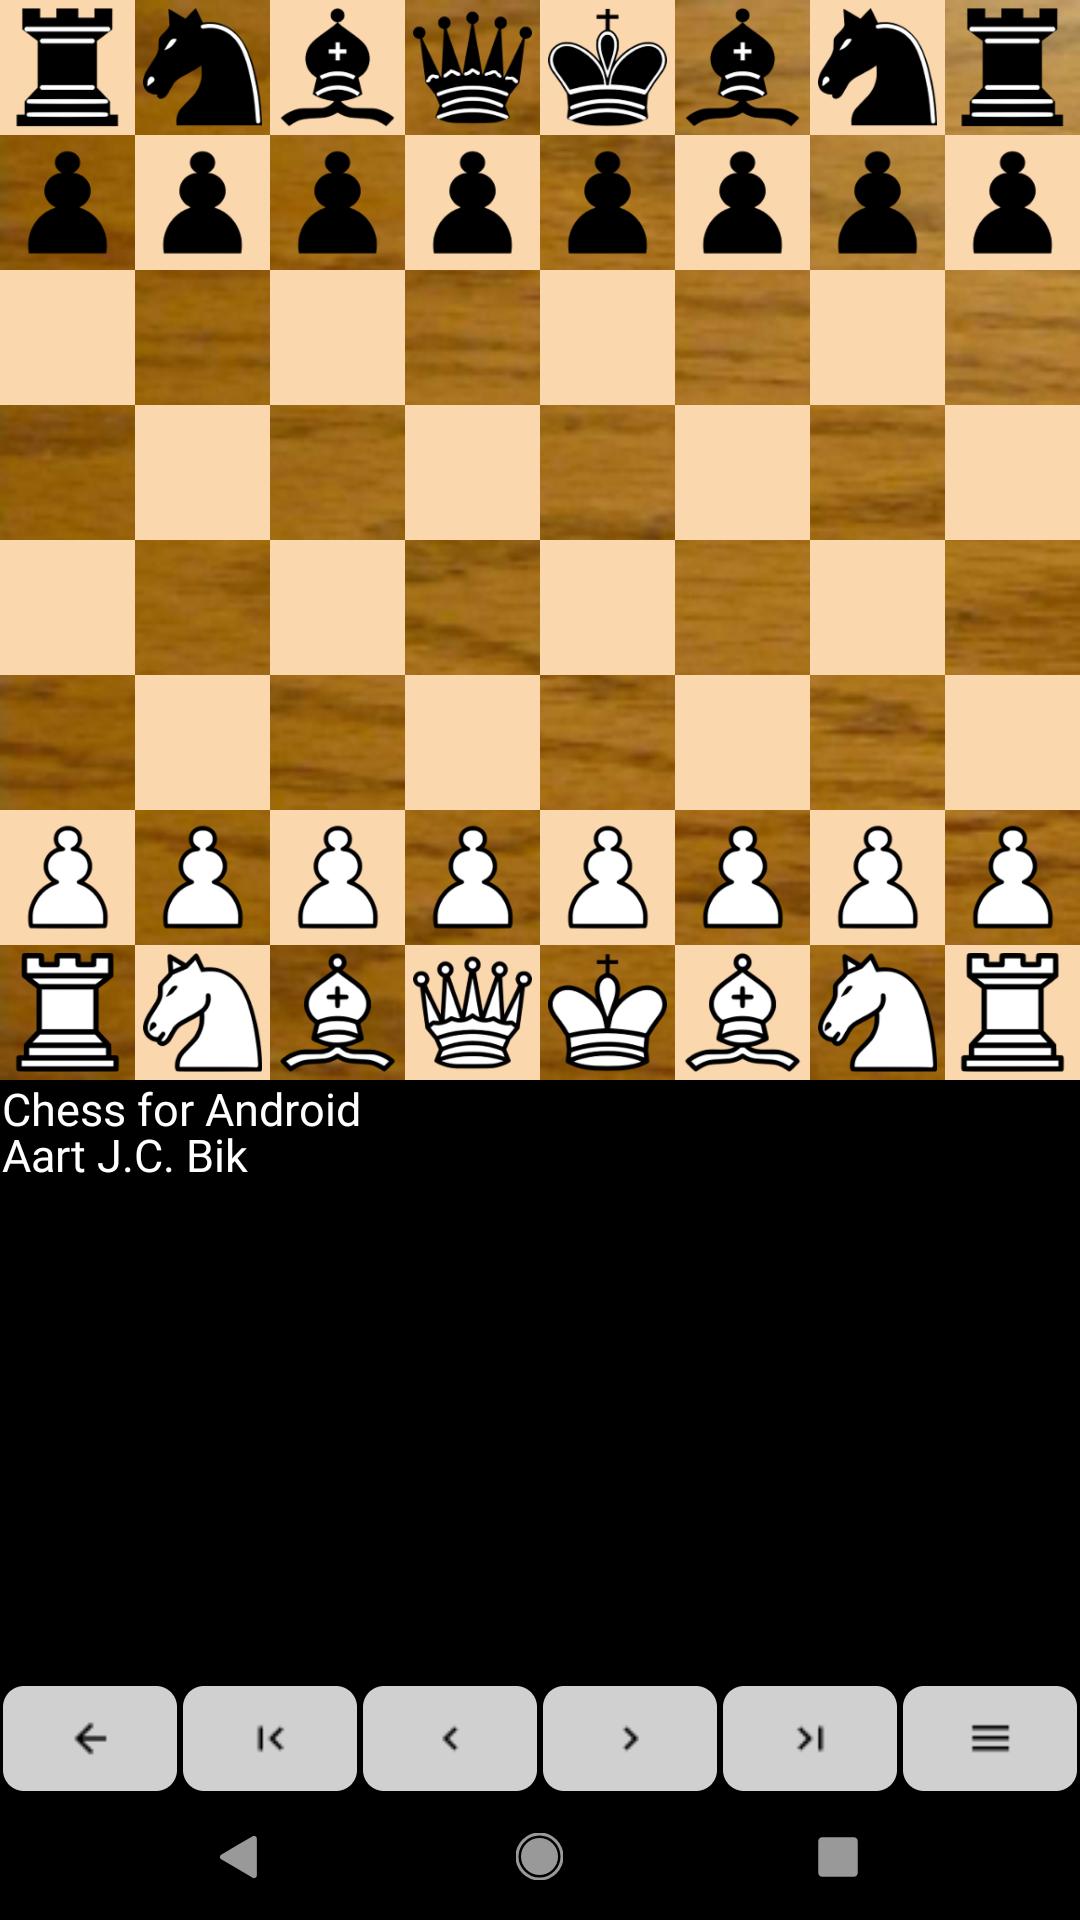 Chess for Android 6.2.1 Screenshot 1